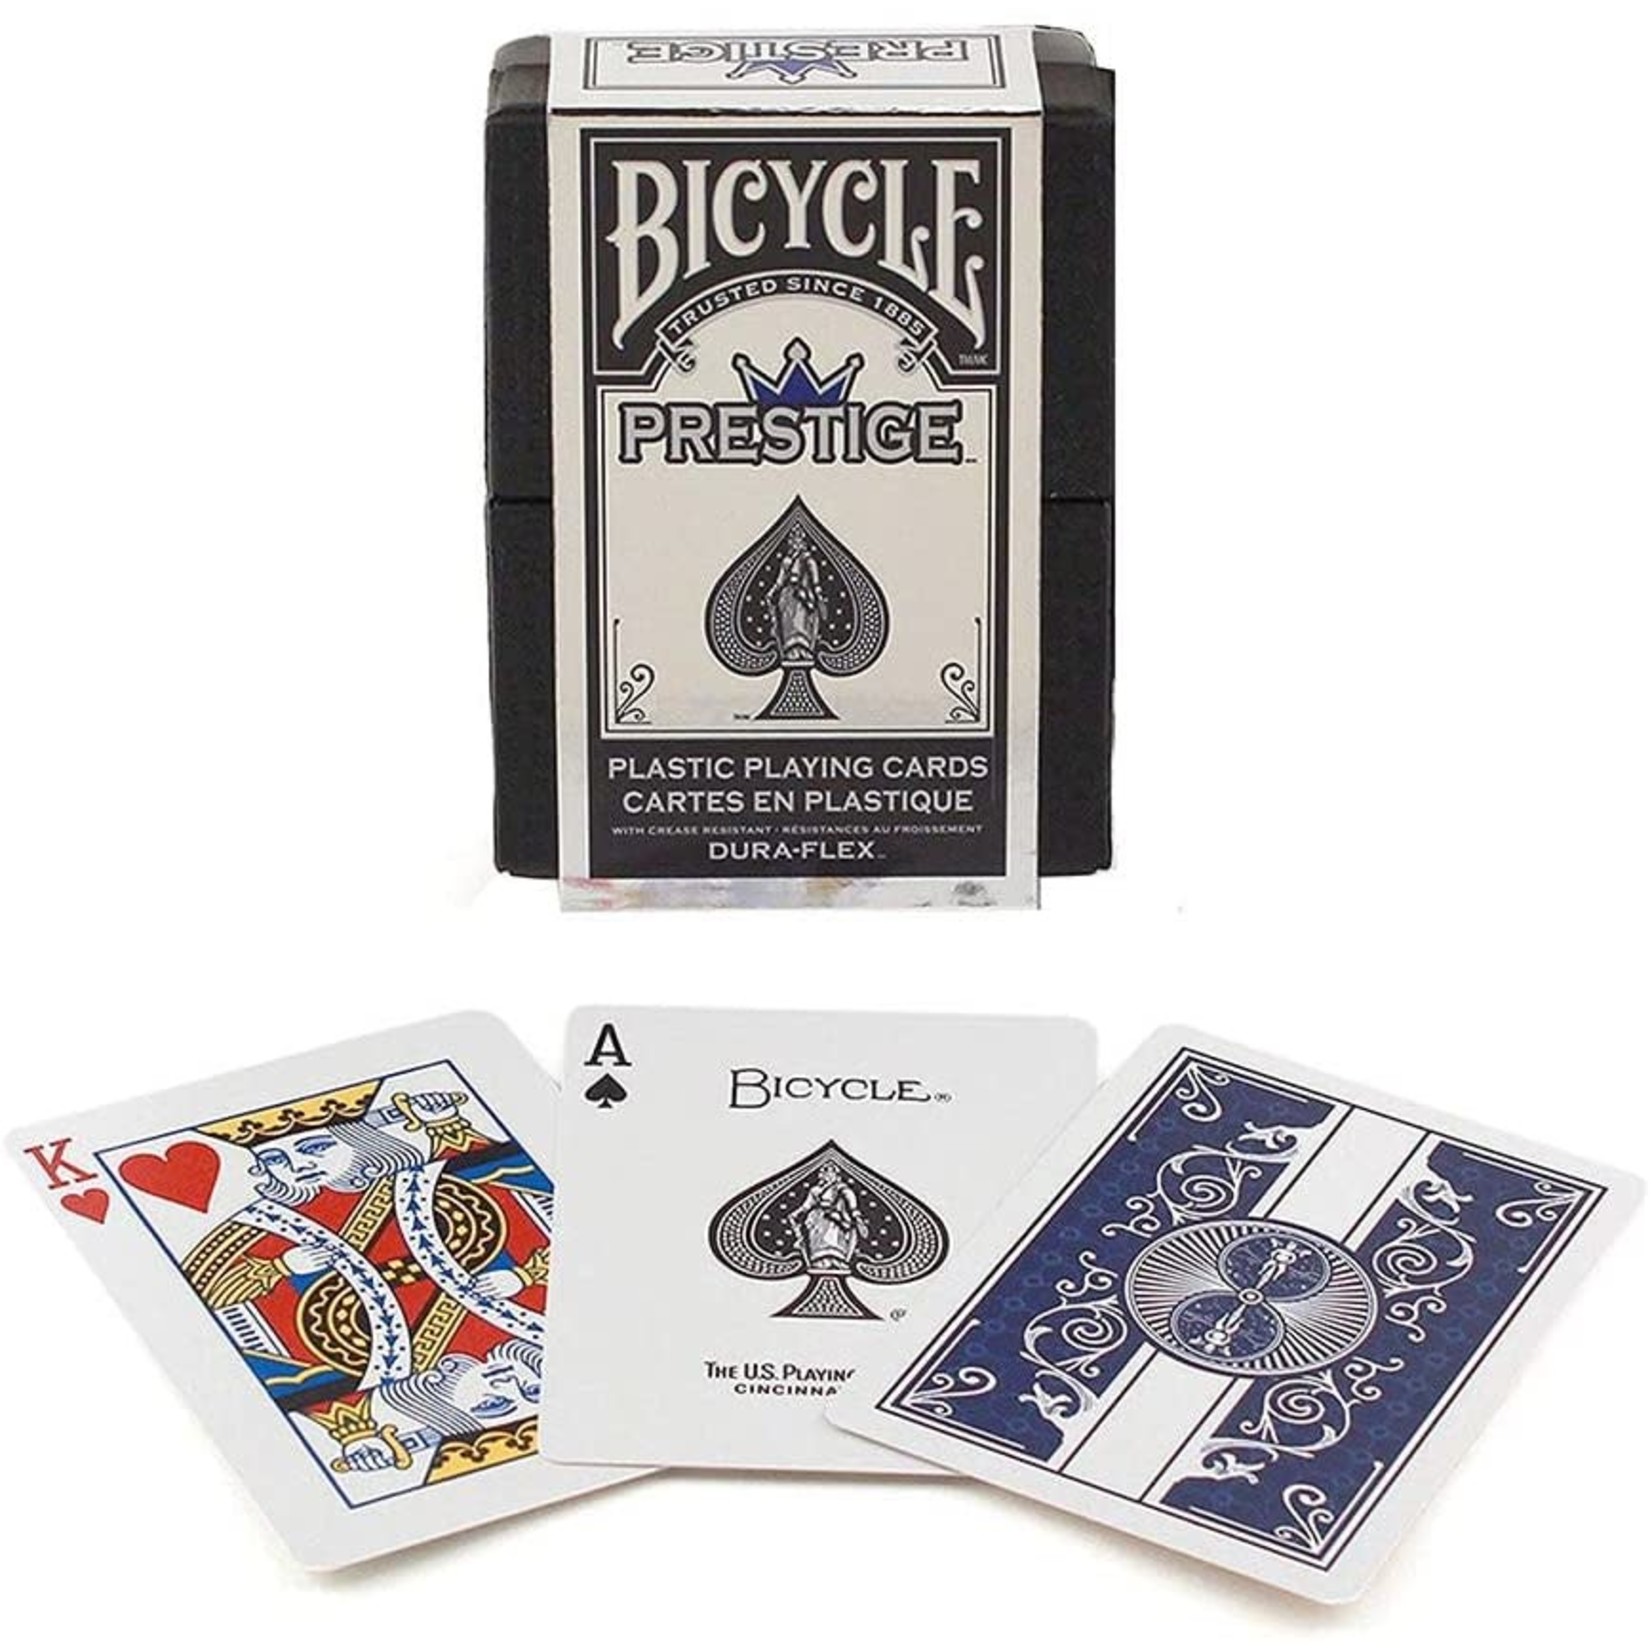 Bicycle Bicycle Playing Cards: Prestige